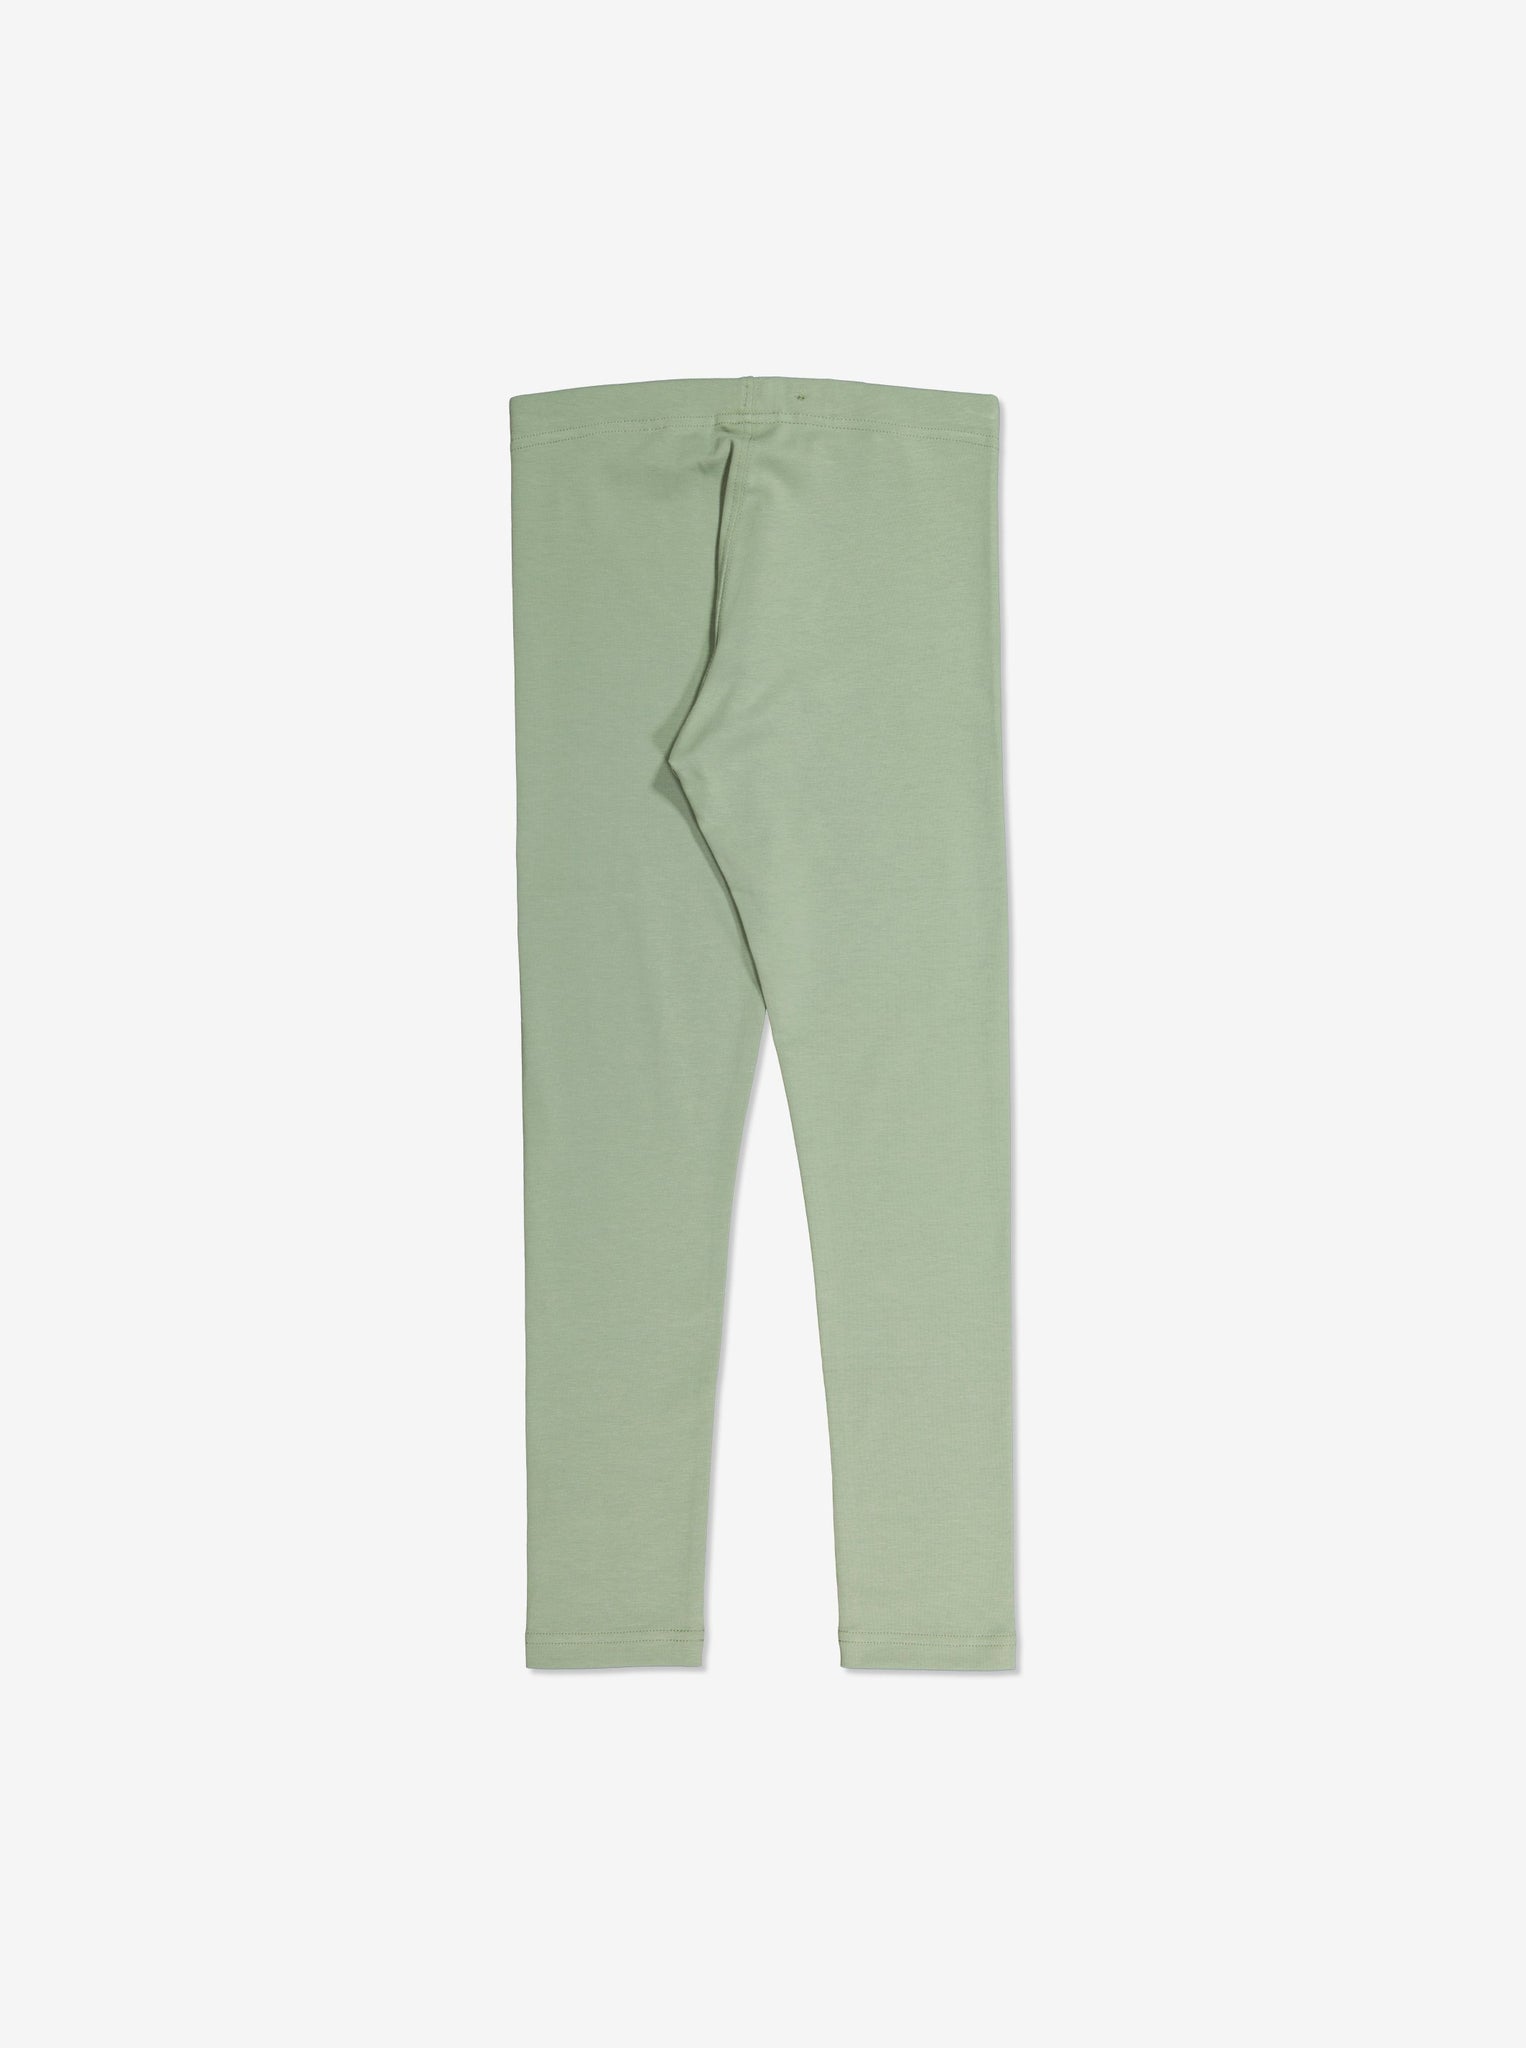  Organic Cotton Green Kids Leggings from Polarn O. Pyret Kidswear. Made from ethically sourced materials.